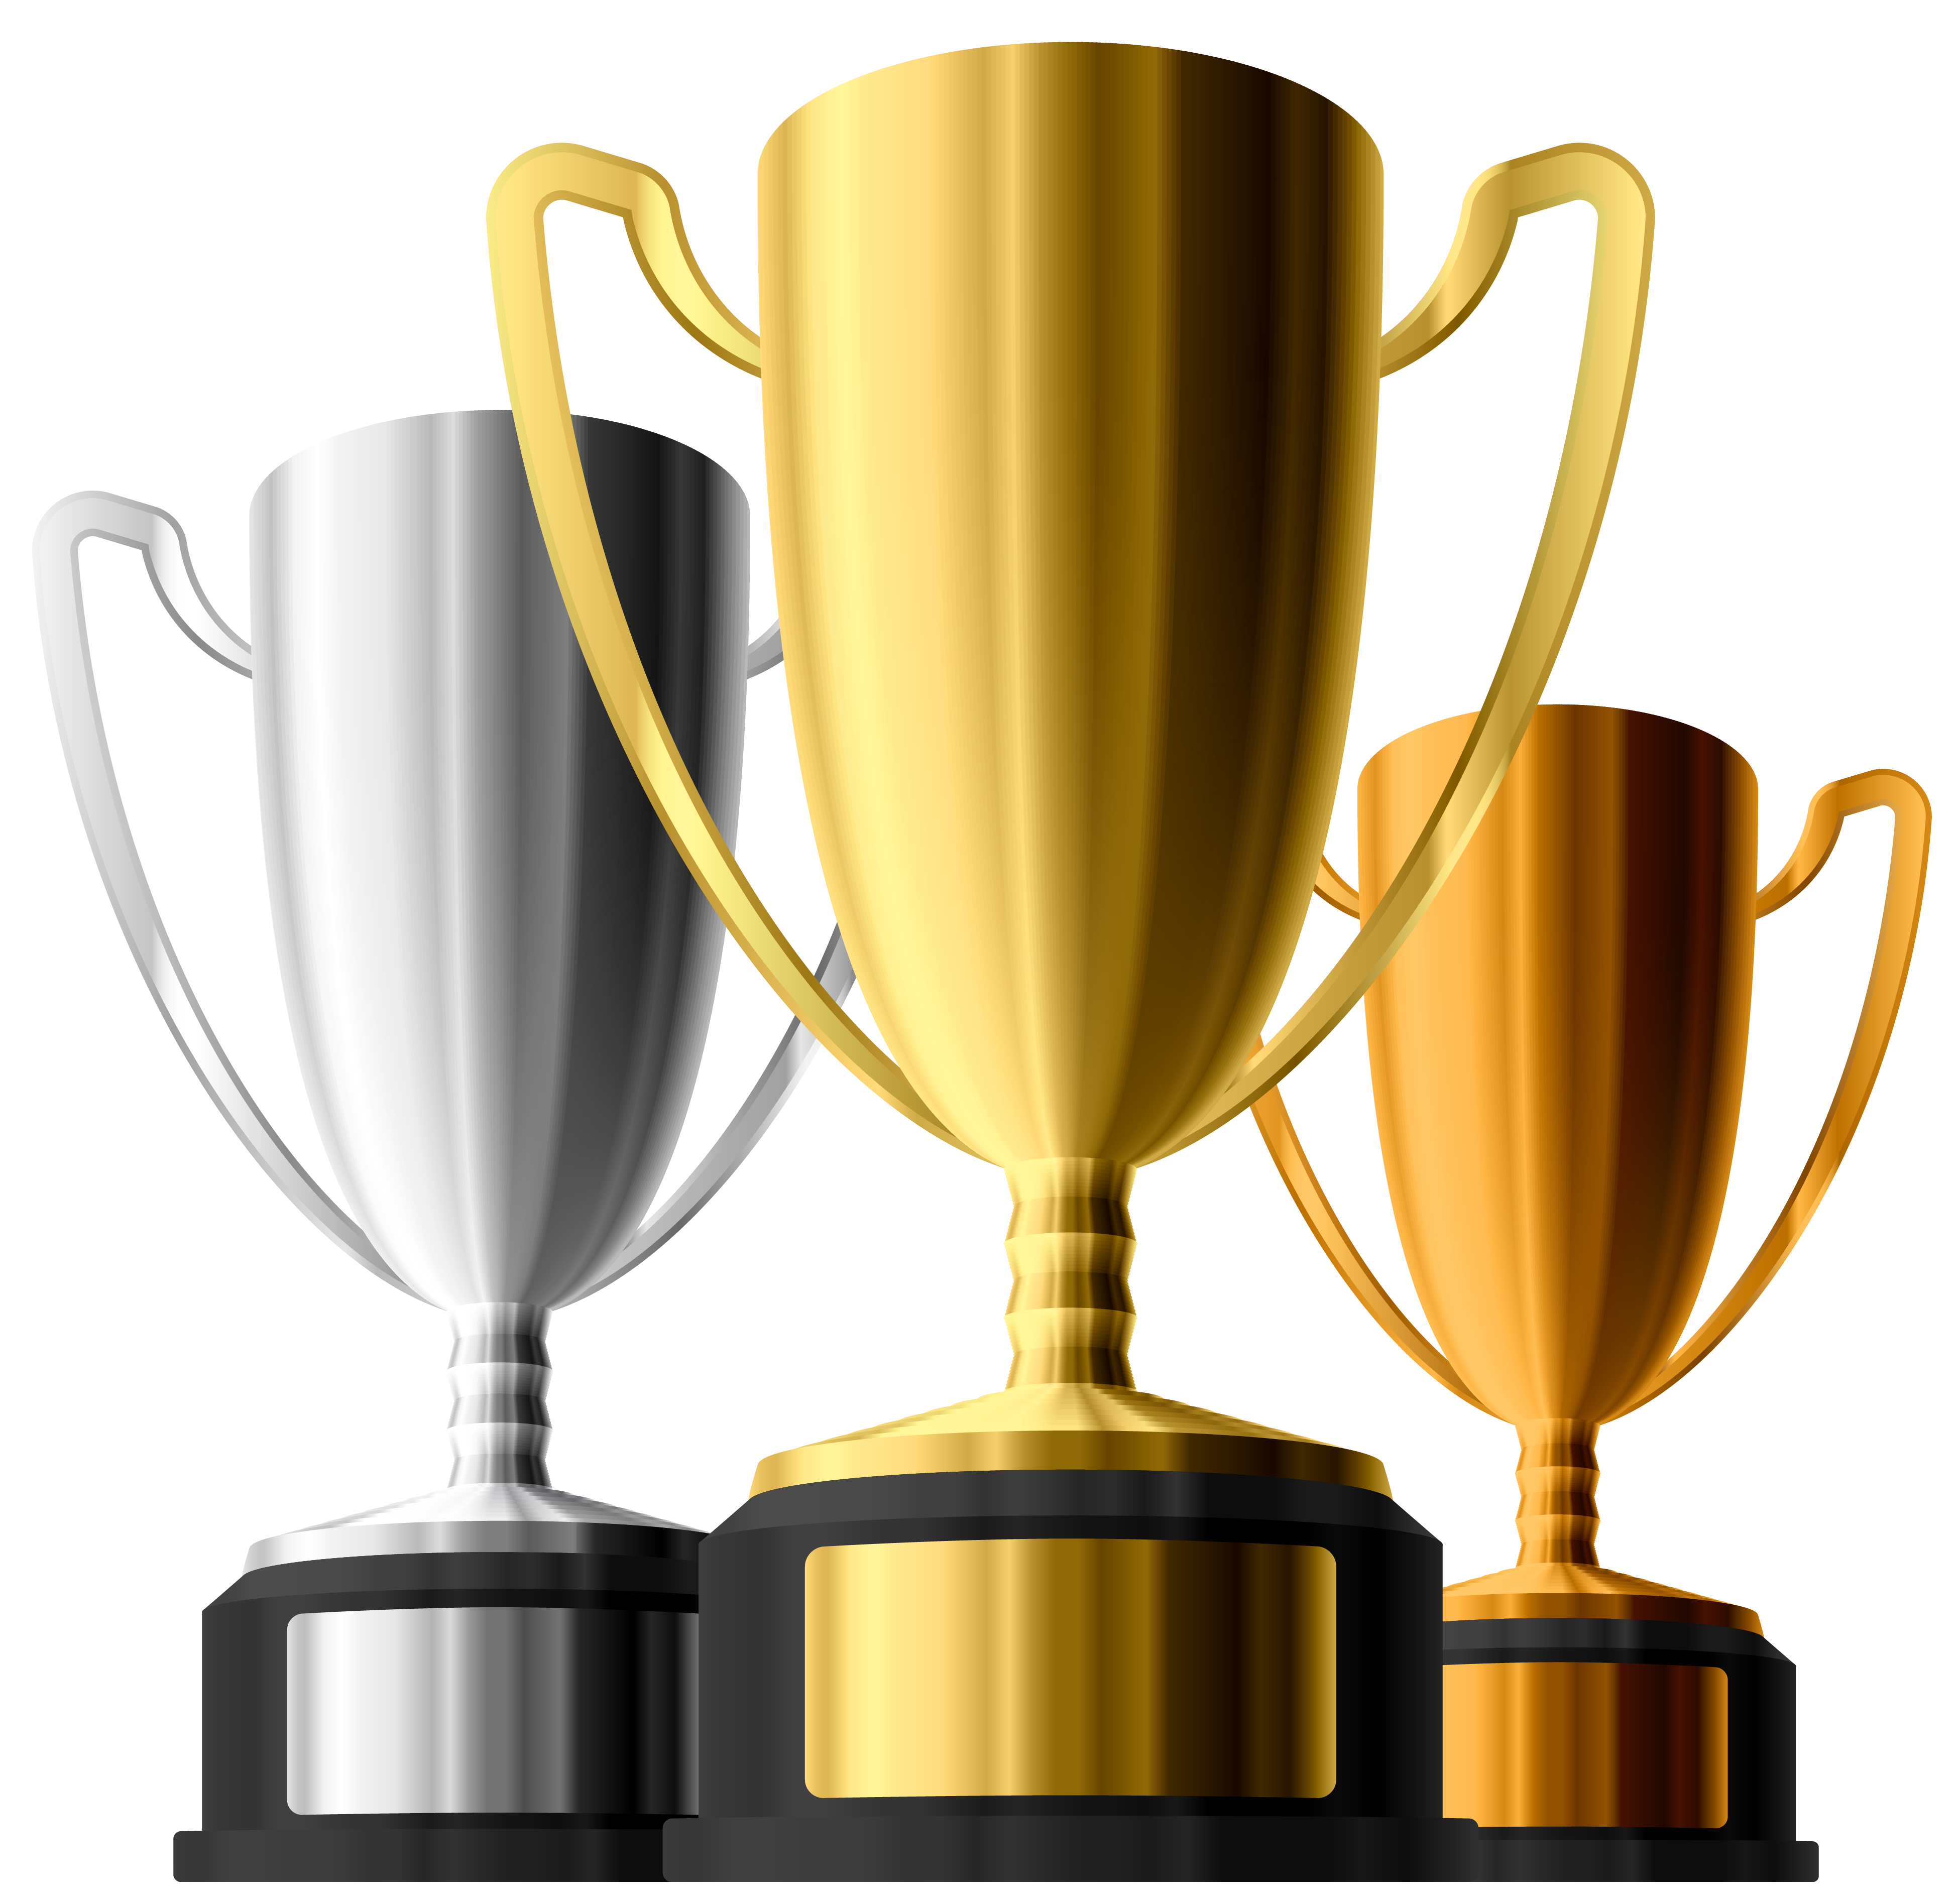 free clipart images trophy - photo #26